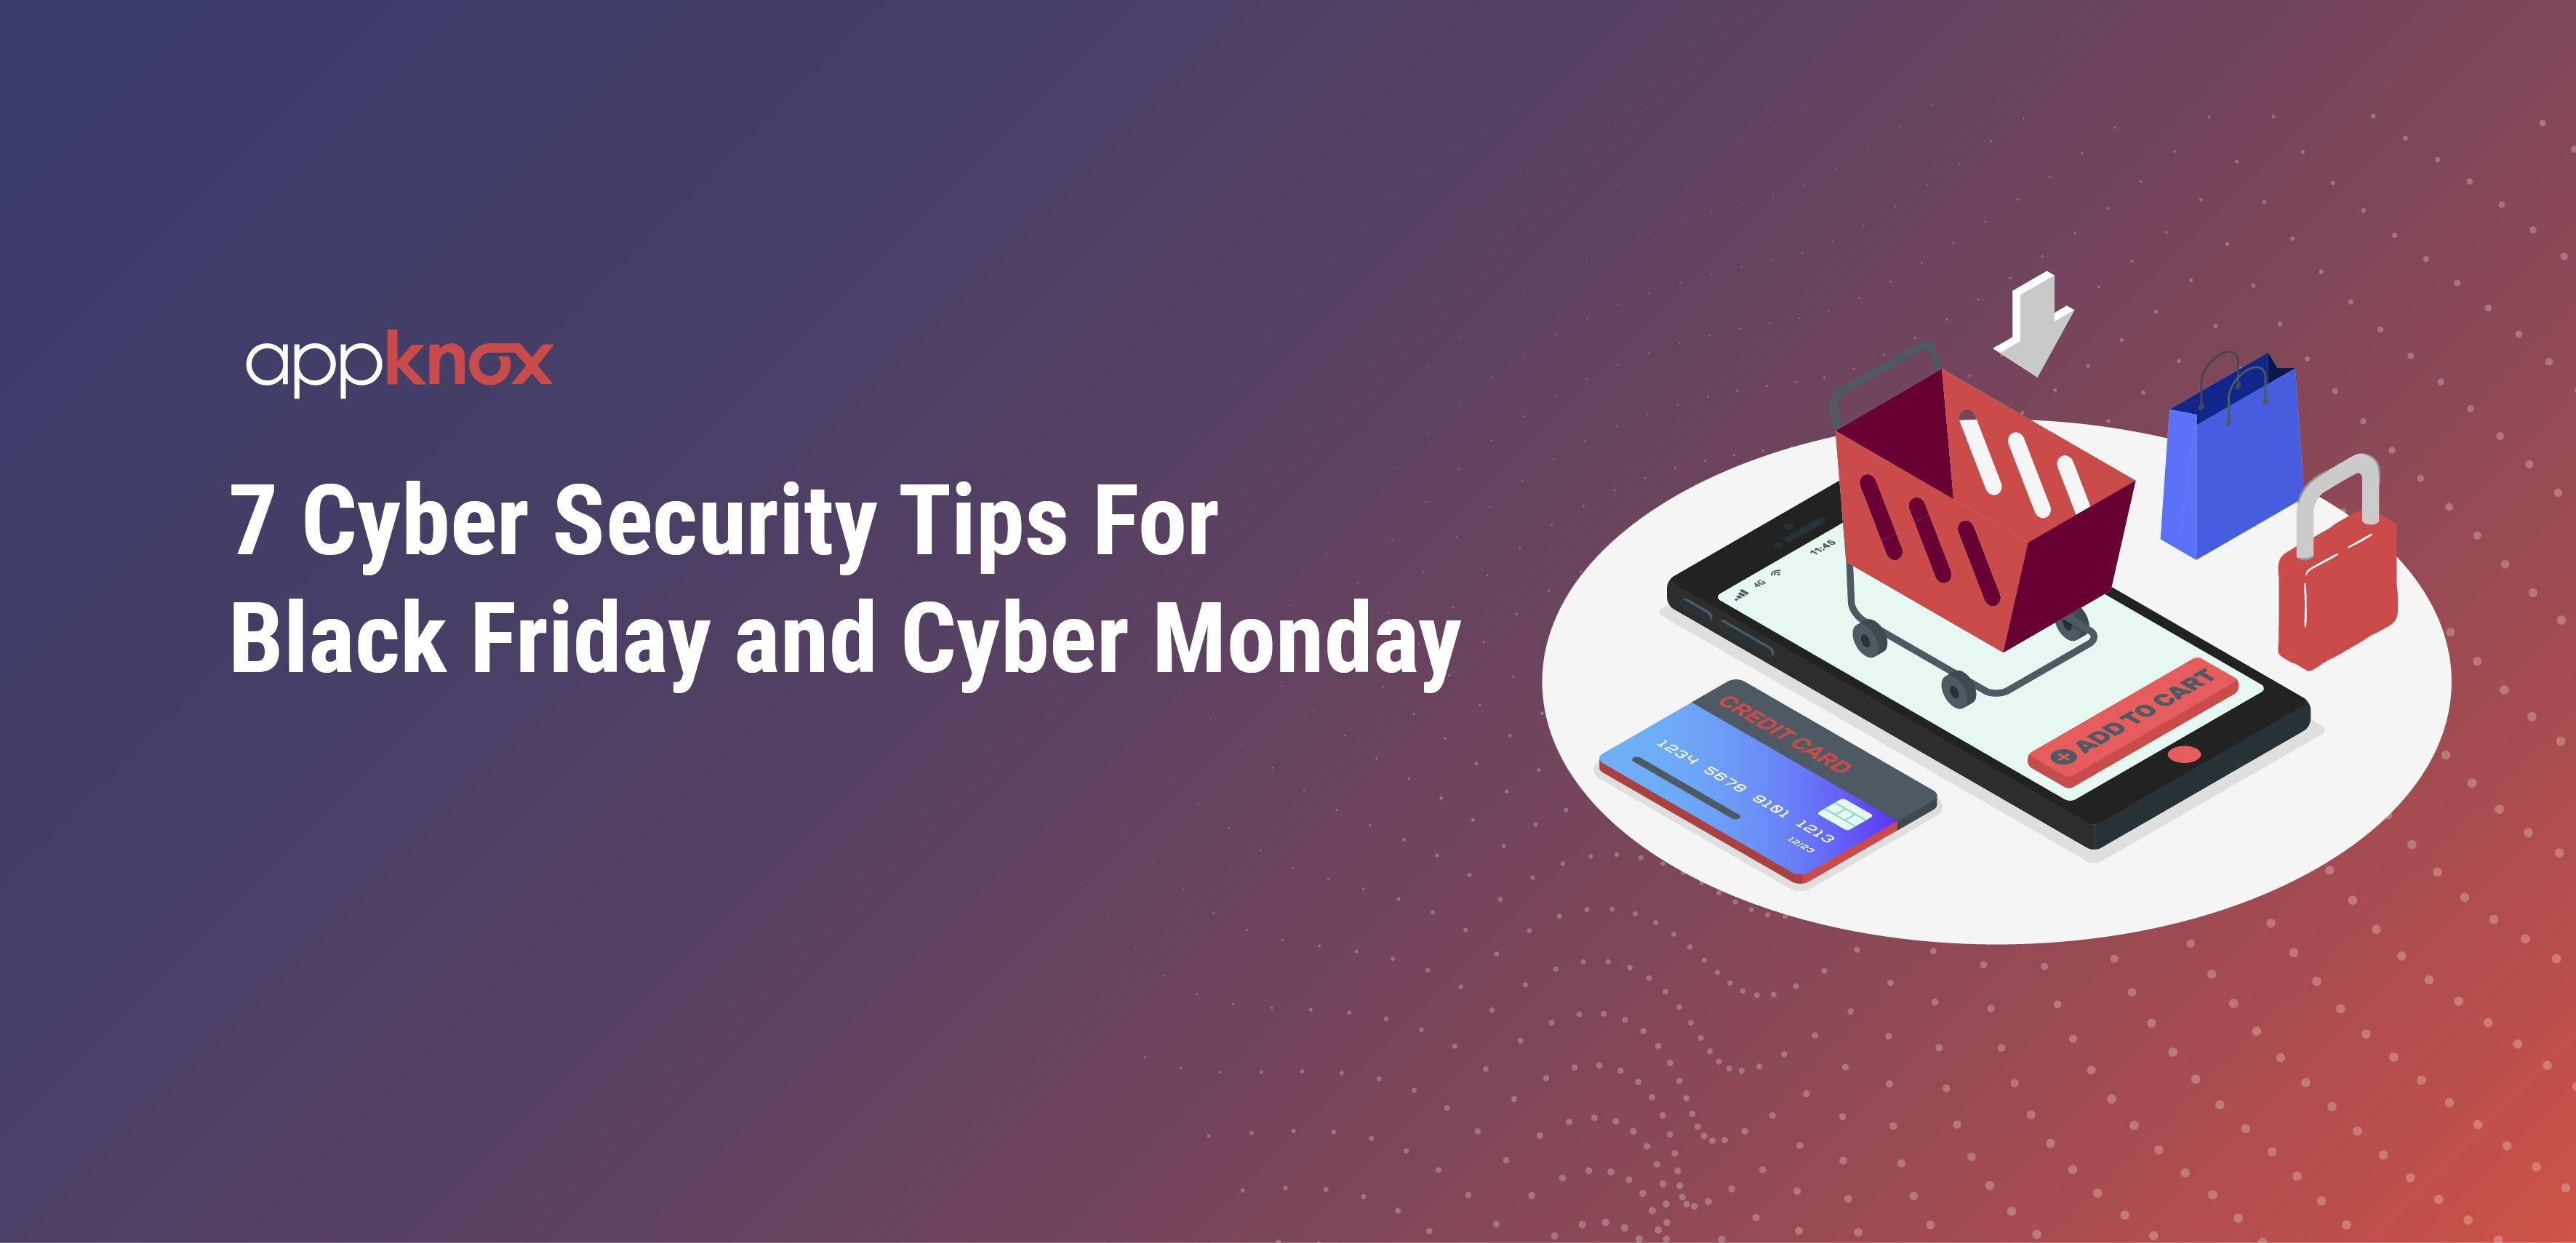 7 Cyber Security Tips For Black Friday and Cyber Monday